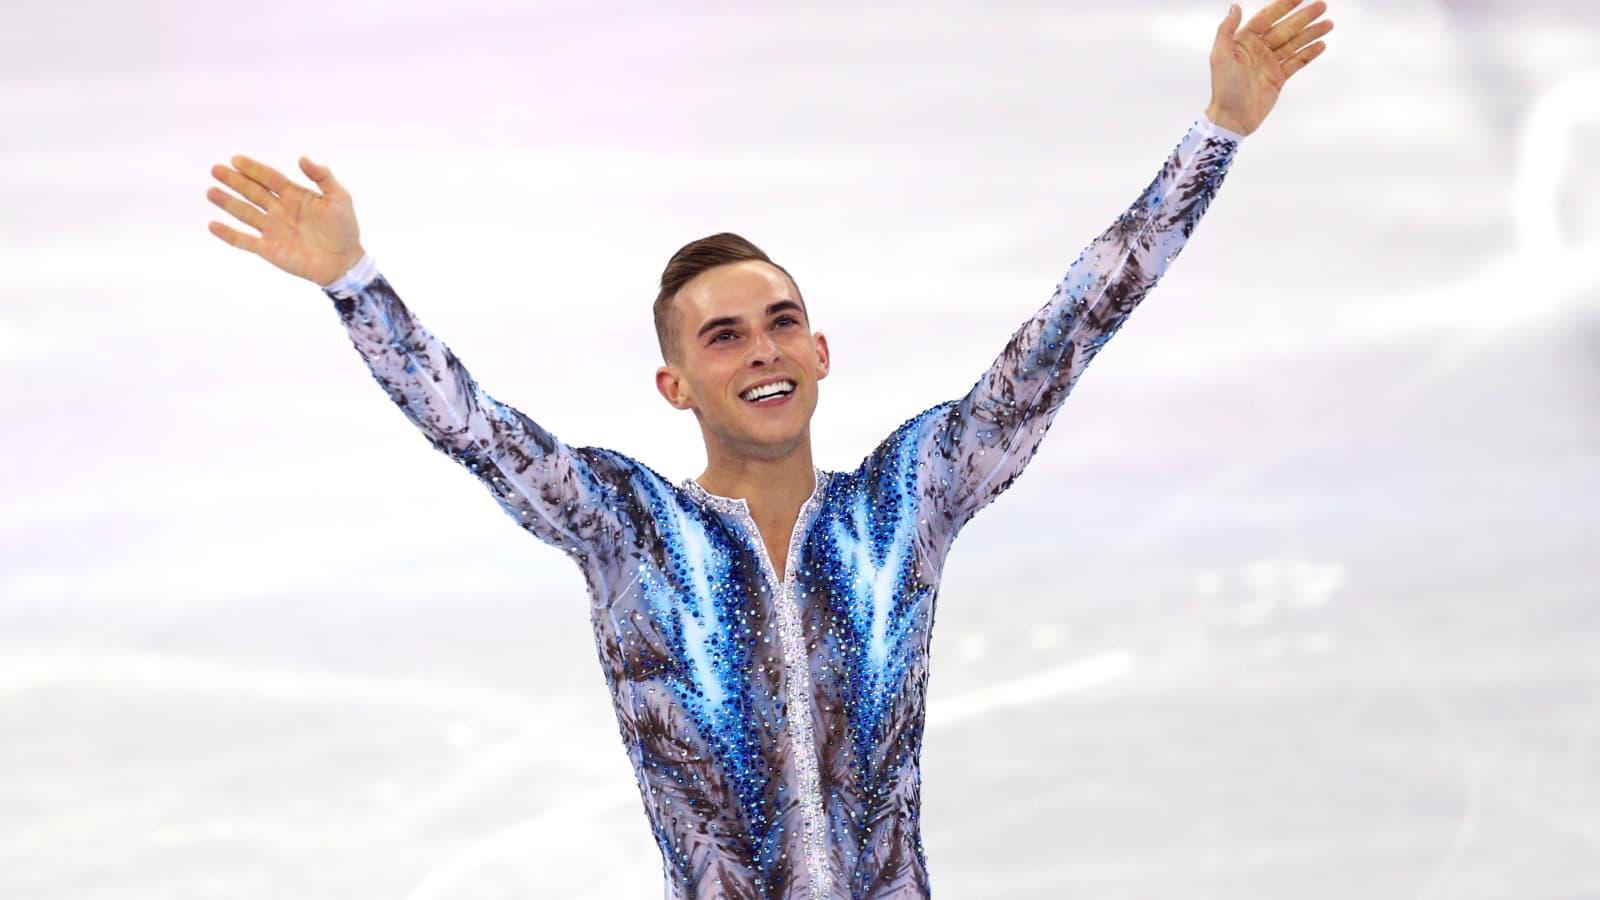 Before the Olympics, Adam Rippon was living in his coach's basement